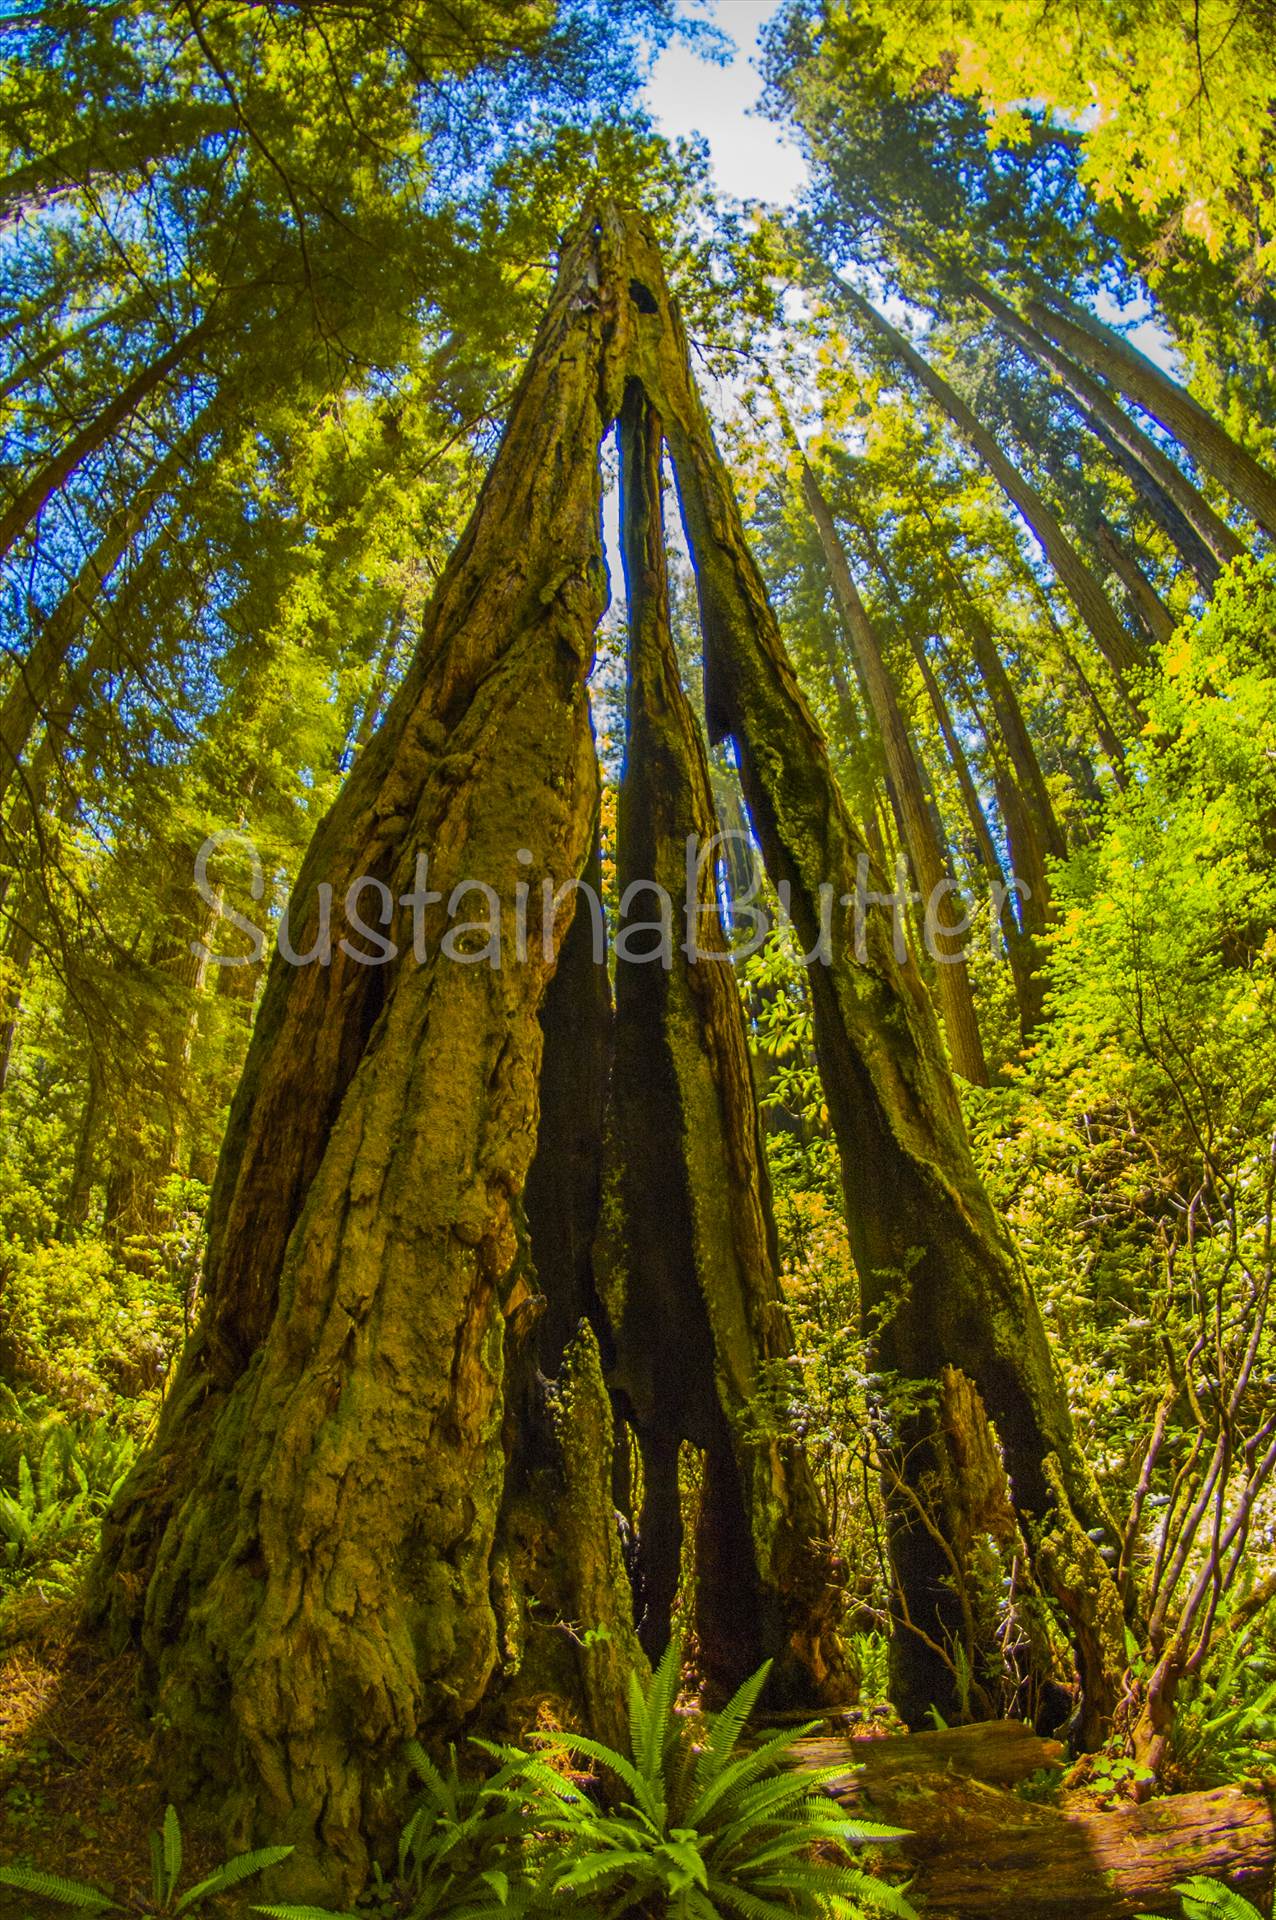 SustainaButter Watermarked Redwood.jpg  by WPC-66